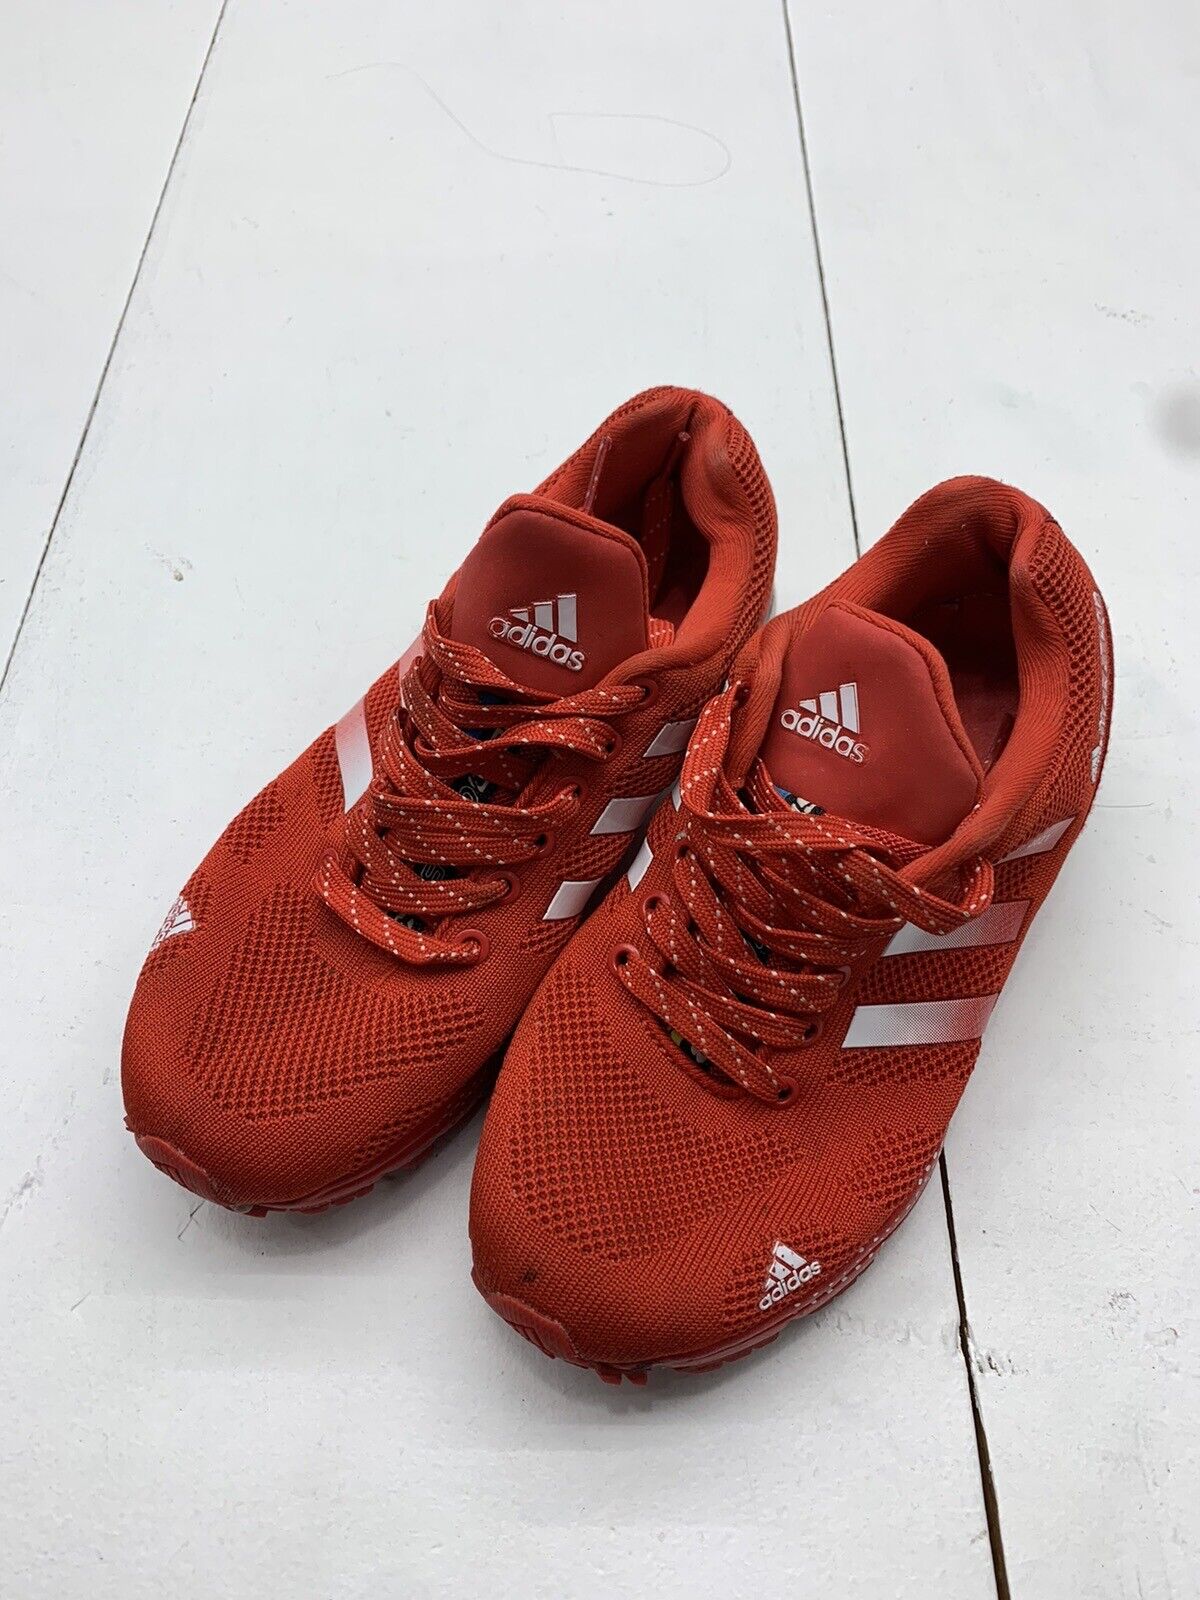 Adidas Mens Red Athletic Running Shoes Size 6